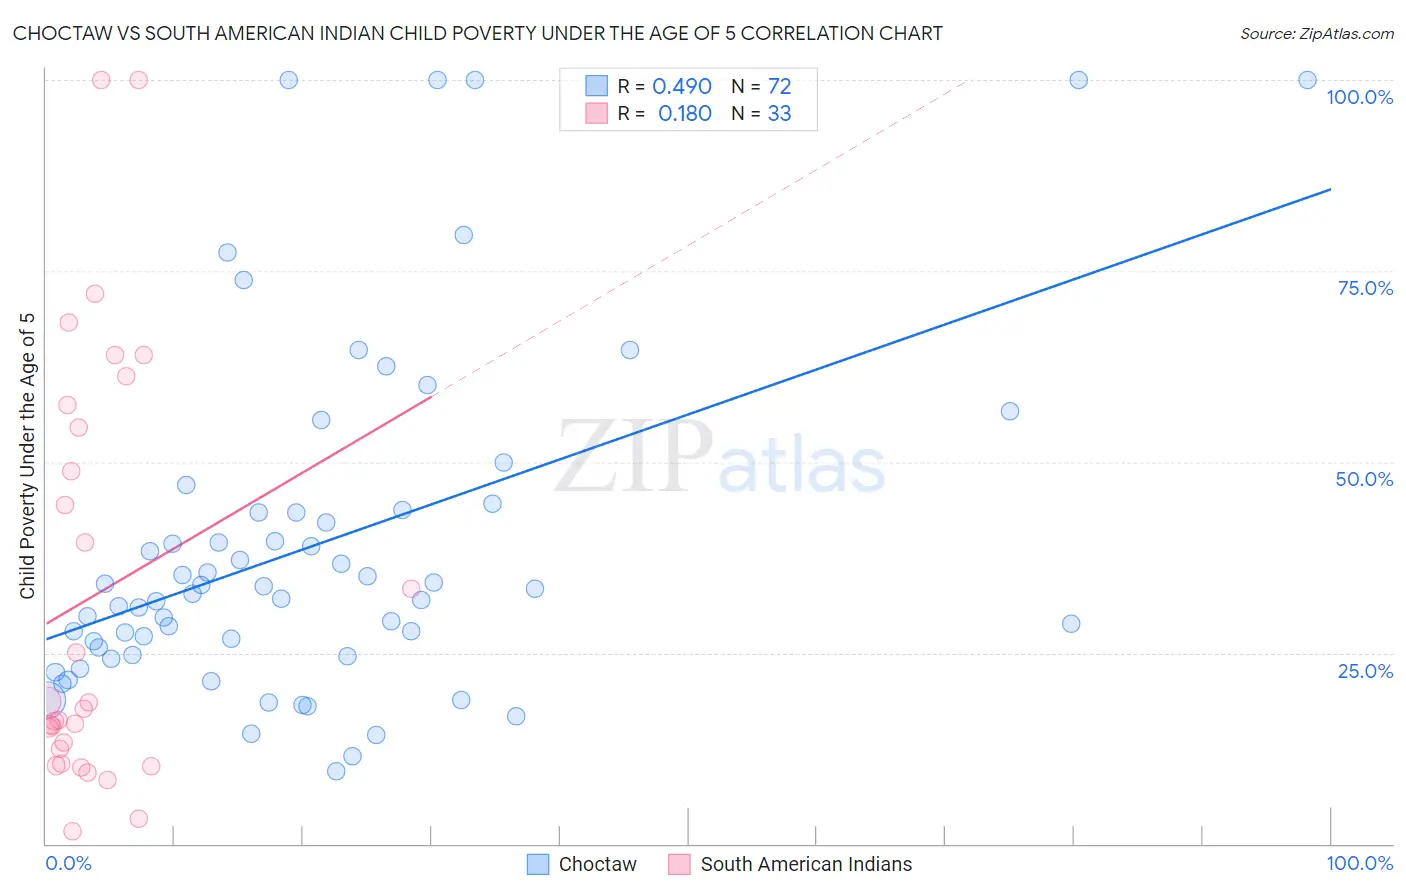 Choctaw vs South American Indian Child Poverty Under the Age of 5